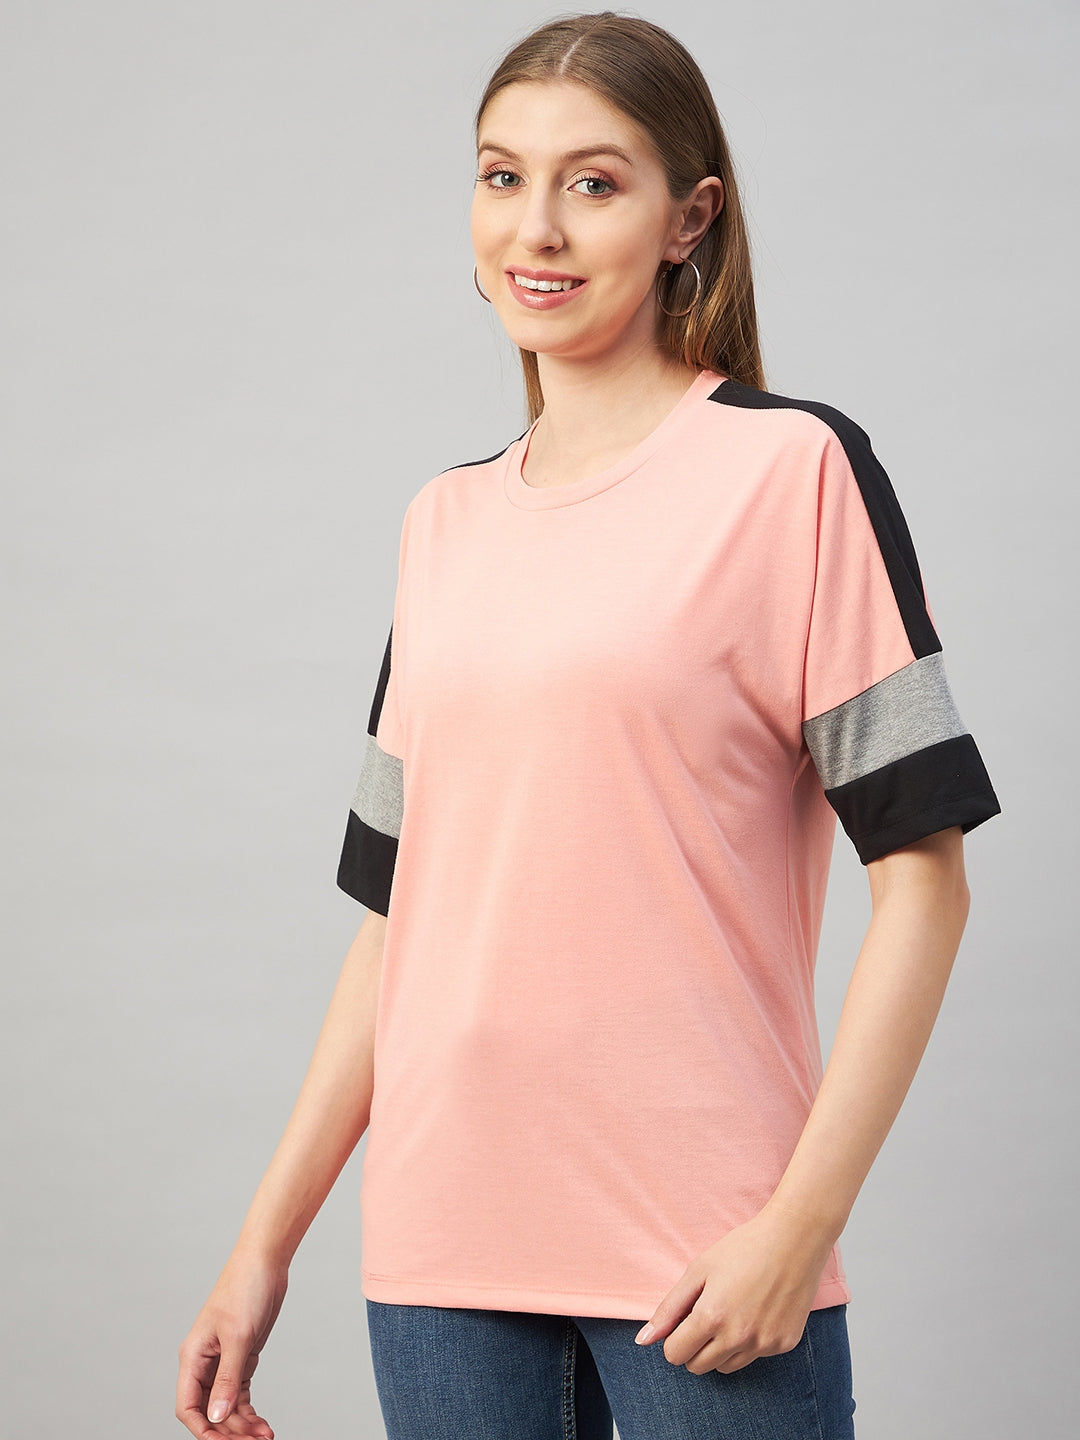 Austin Wood Women Solid Casual Top